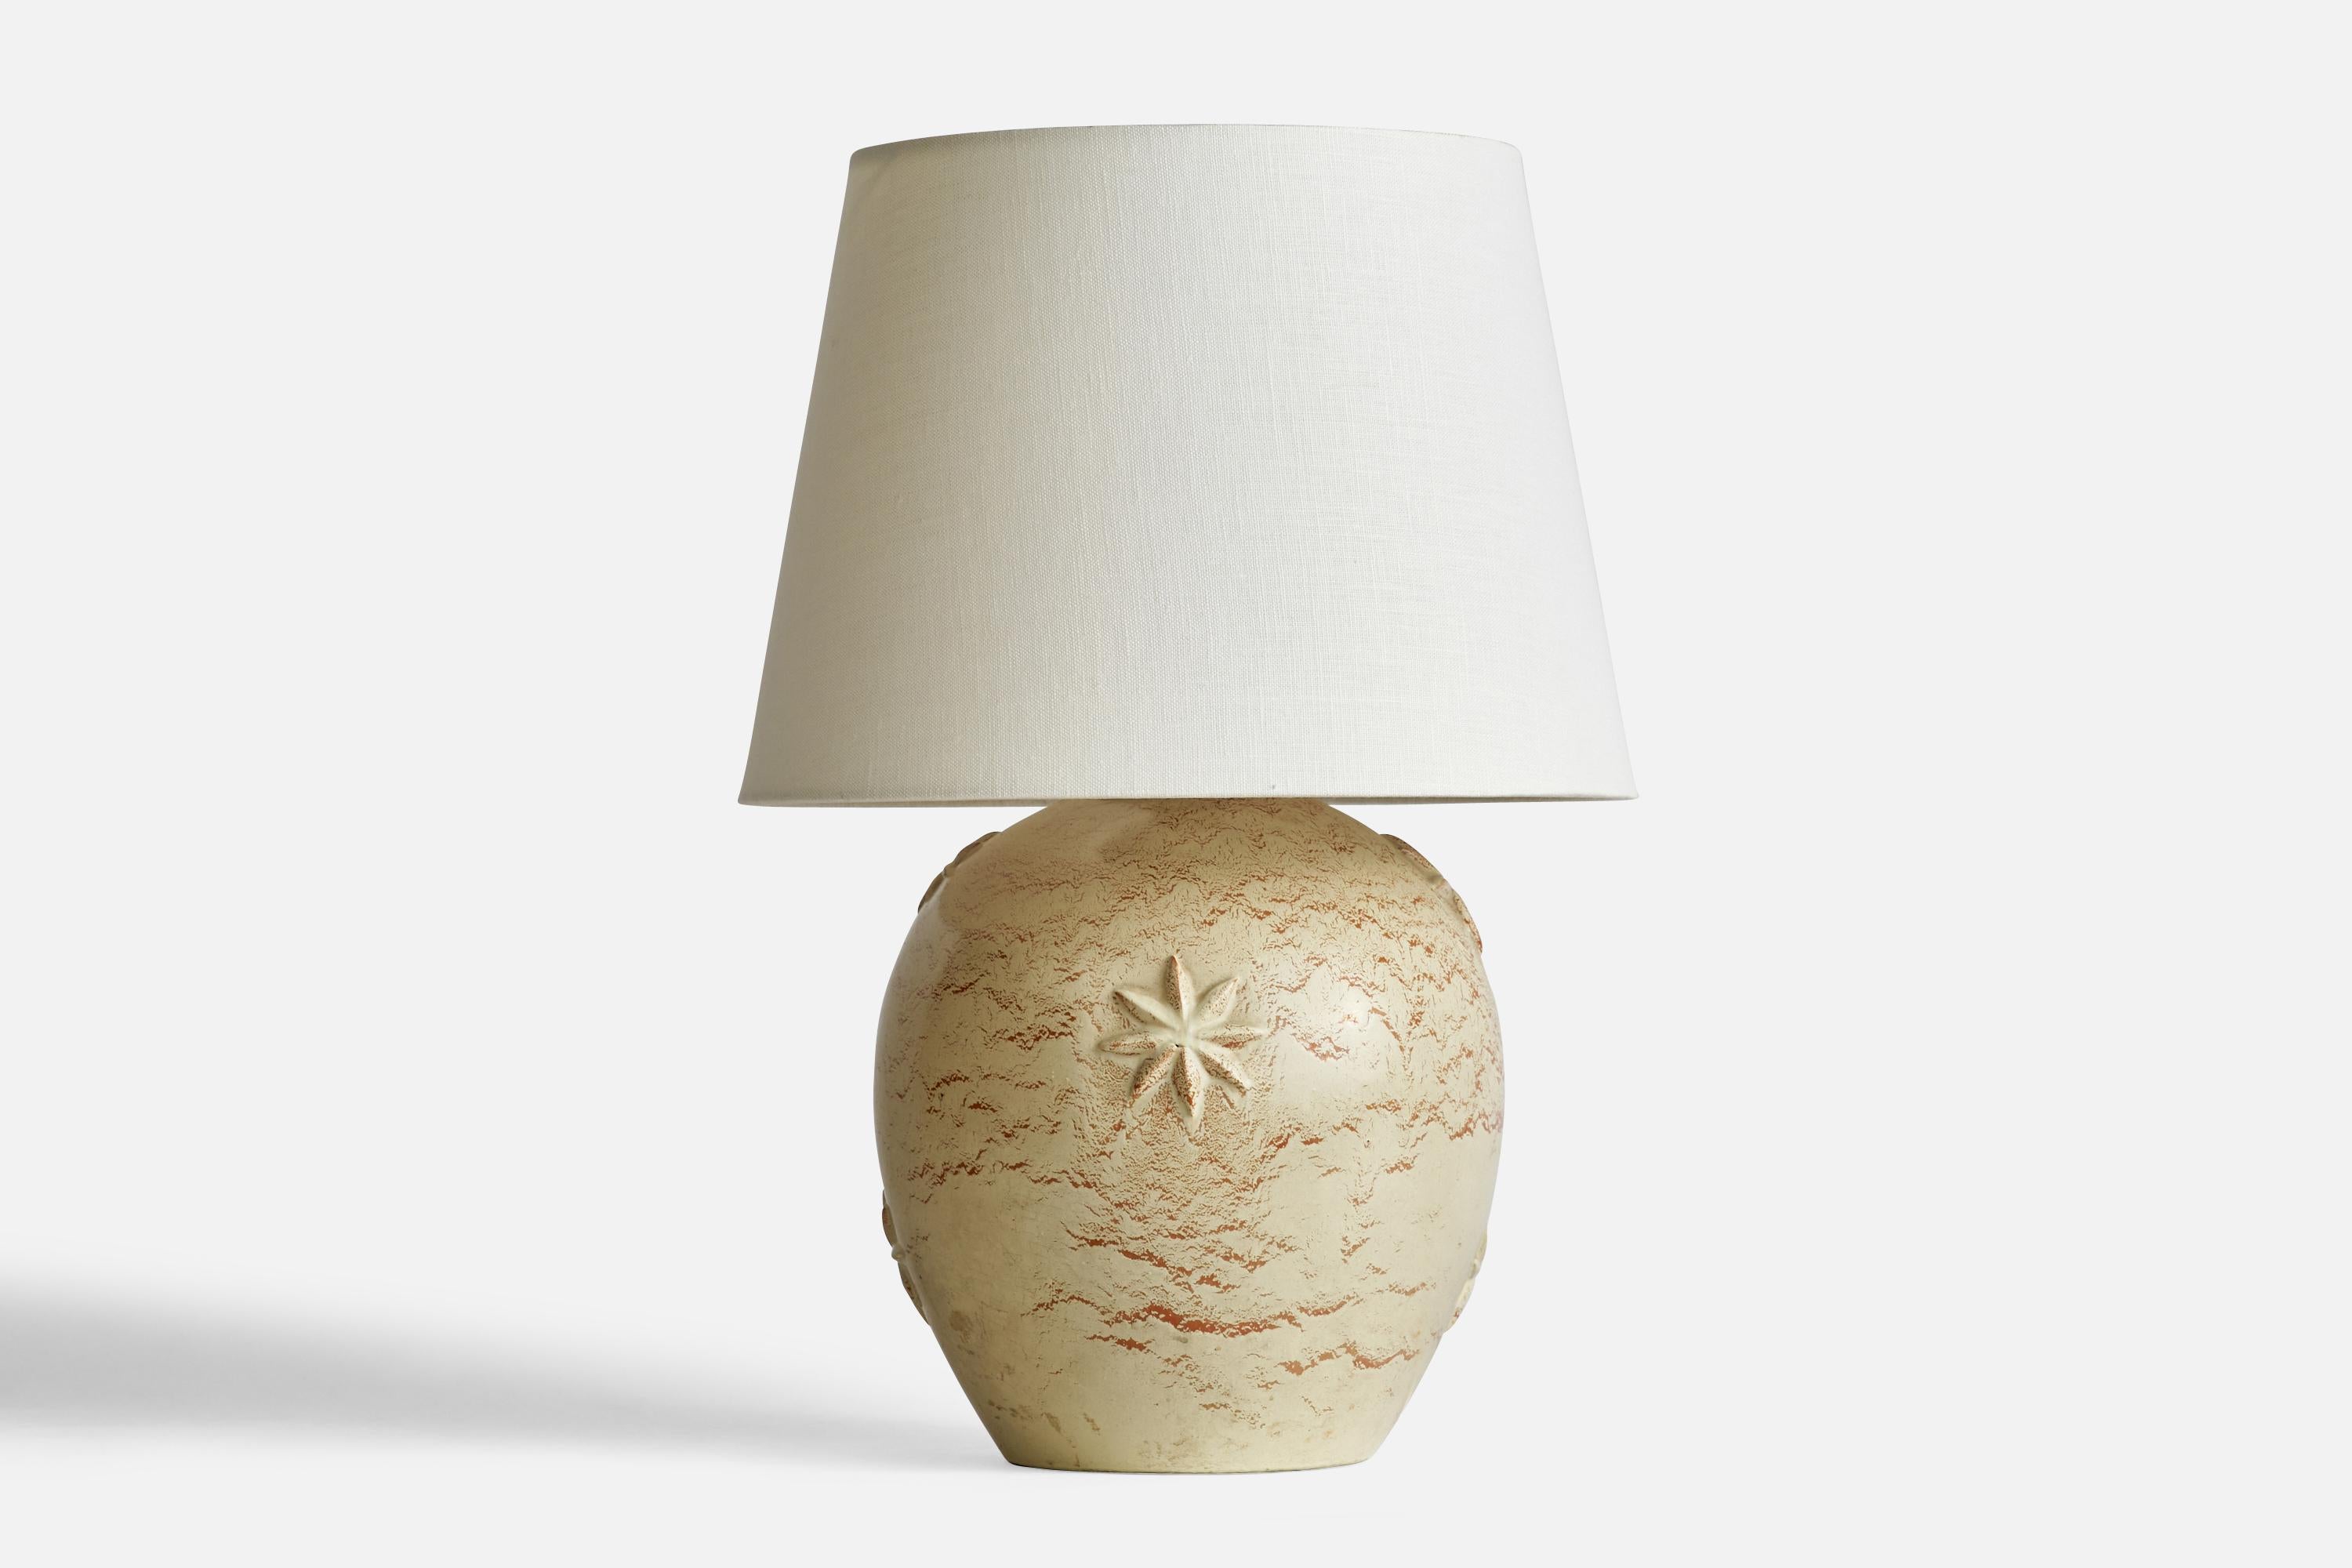 A light-beige ceramic and brass table lamp designed by Jerk Werkmäster and produced by Nittsjö, Sweden, c. 1930s.

Dimensions of Lamp (inches): 11.9” H x 8.15” Diameter
Dimensions of Shade (inches): 9” Top Diameter x 12” Bottom Diameter x 9”